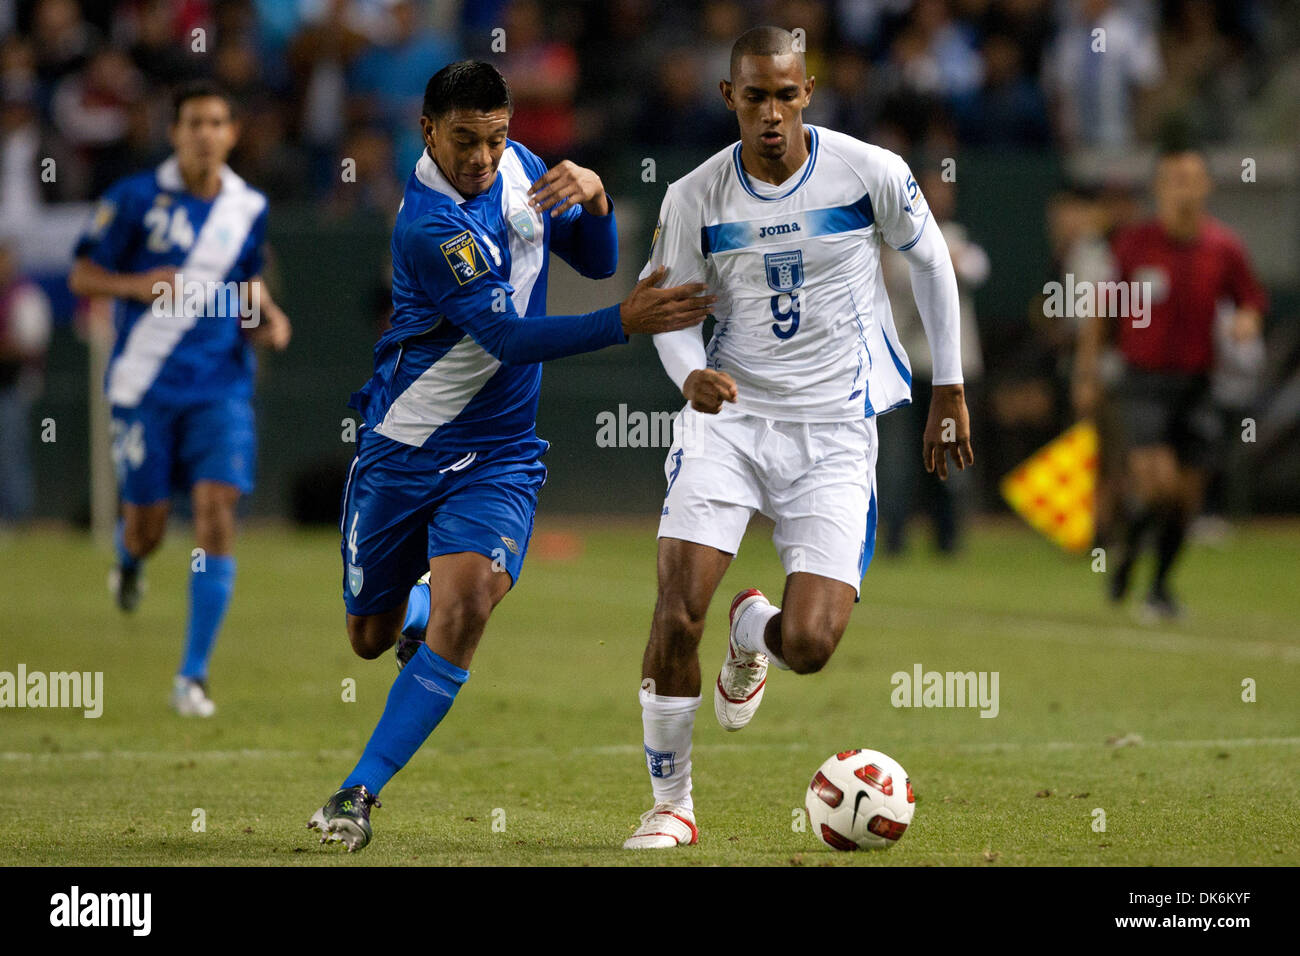 June 6, 2011 - Carson, California, U.S - Guatemala midfielder Carlos Castrillo #4 (L) and Honduras Jerry Bengtson forward #9 (R) in action during the 2011 CONCACAF Gold Cup group B game between Honduras and Guatemala at the Home Depot Center. (Credit Image: © Brandon Parry/Southcreek Global/ZUMAPRESS.com) Stock Photo